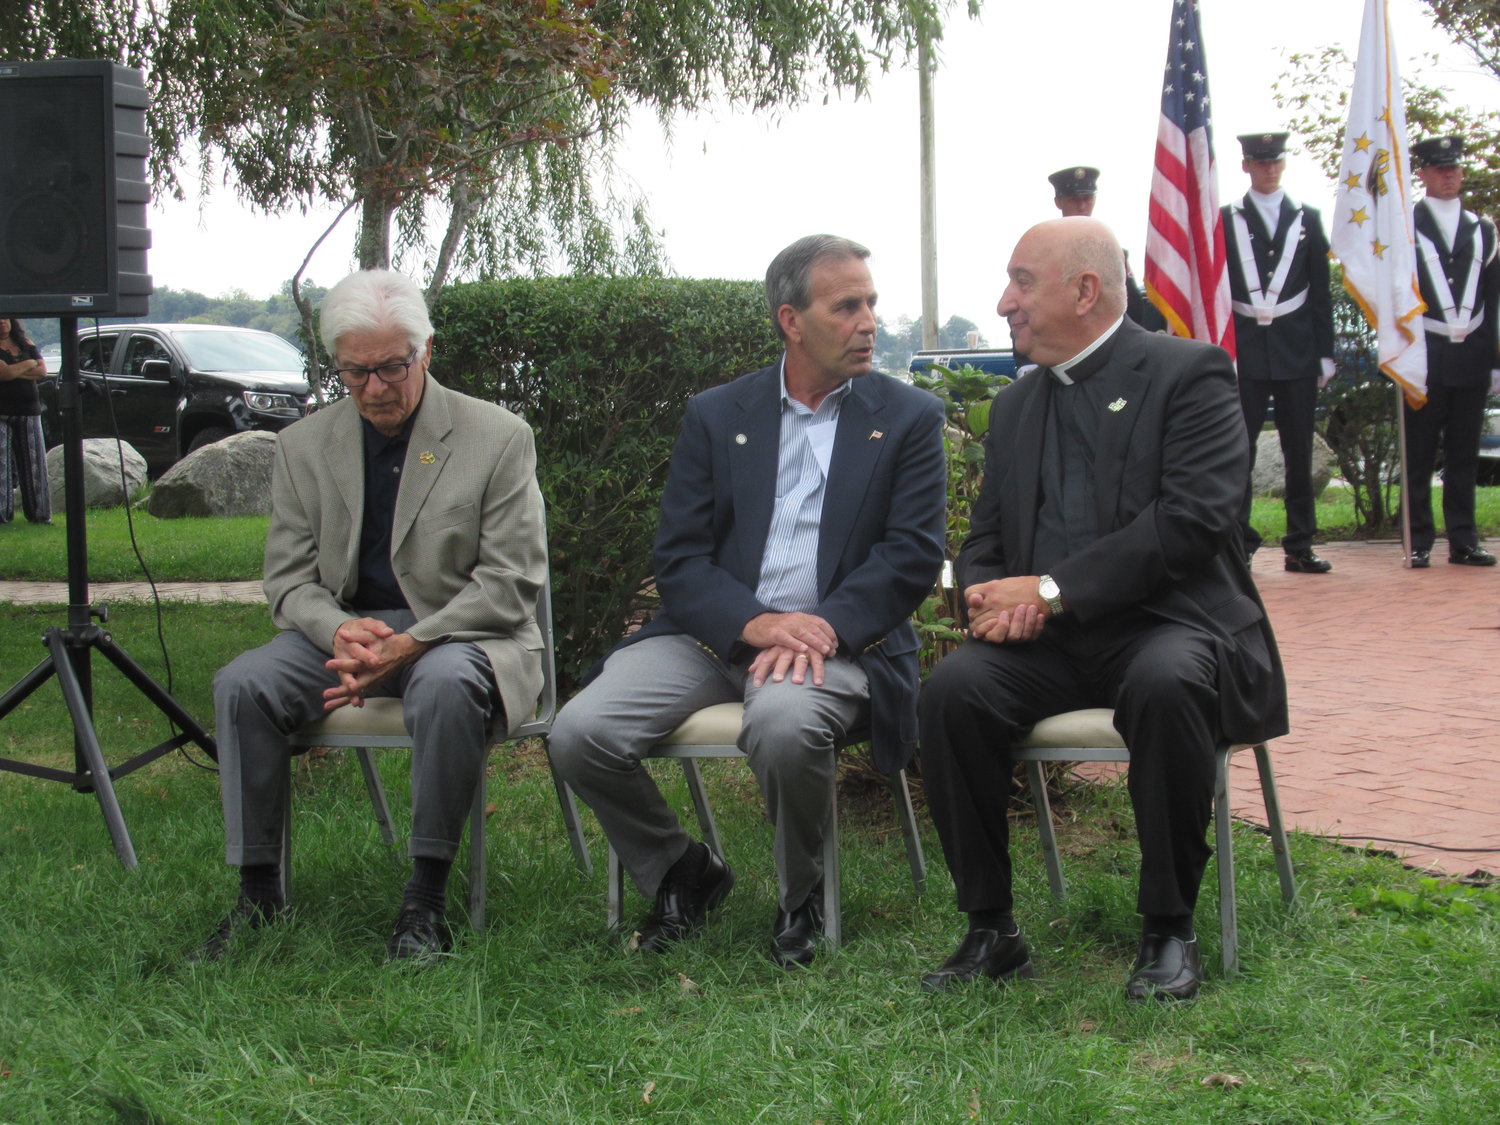 SPECIAL SPEAKERS: Warwick Mayor Frank Picozzi (center), CMSD Sgt. Major Dan Evangelista (left) and Rev. Robert Marciano delivered speeches and prayers during Sunday’s 9/11 remembrance ceremony.